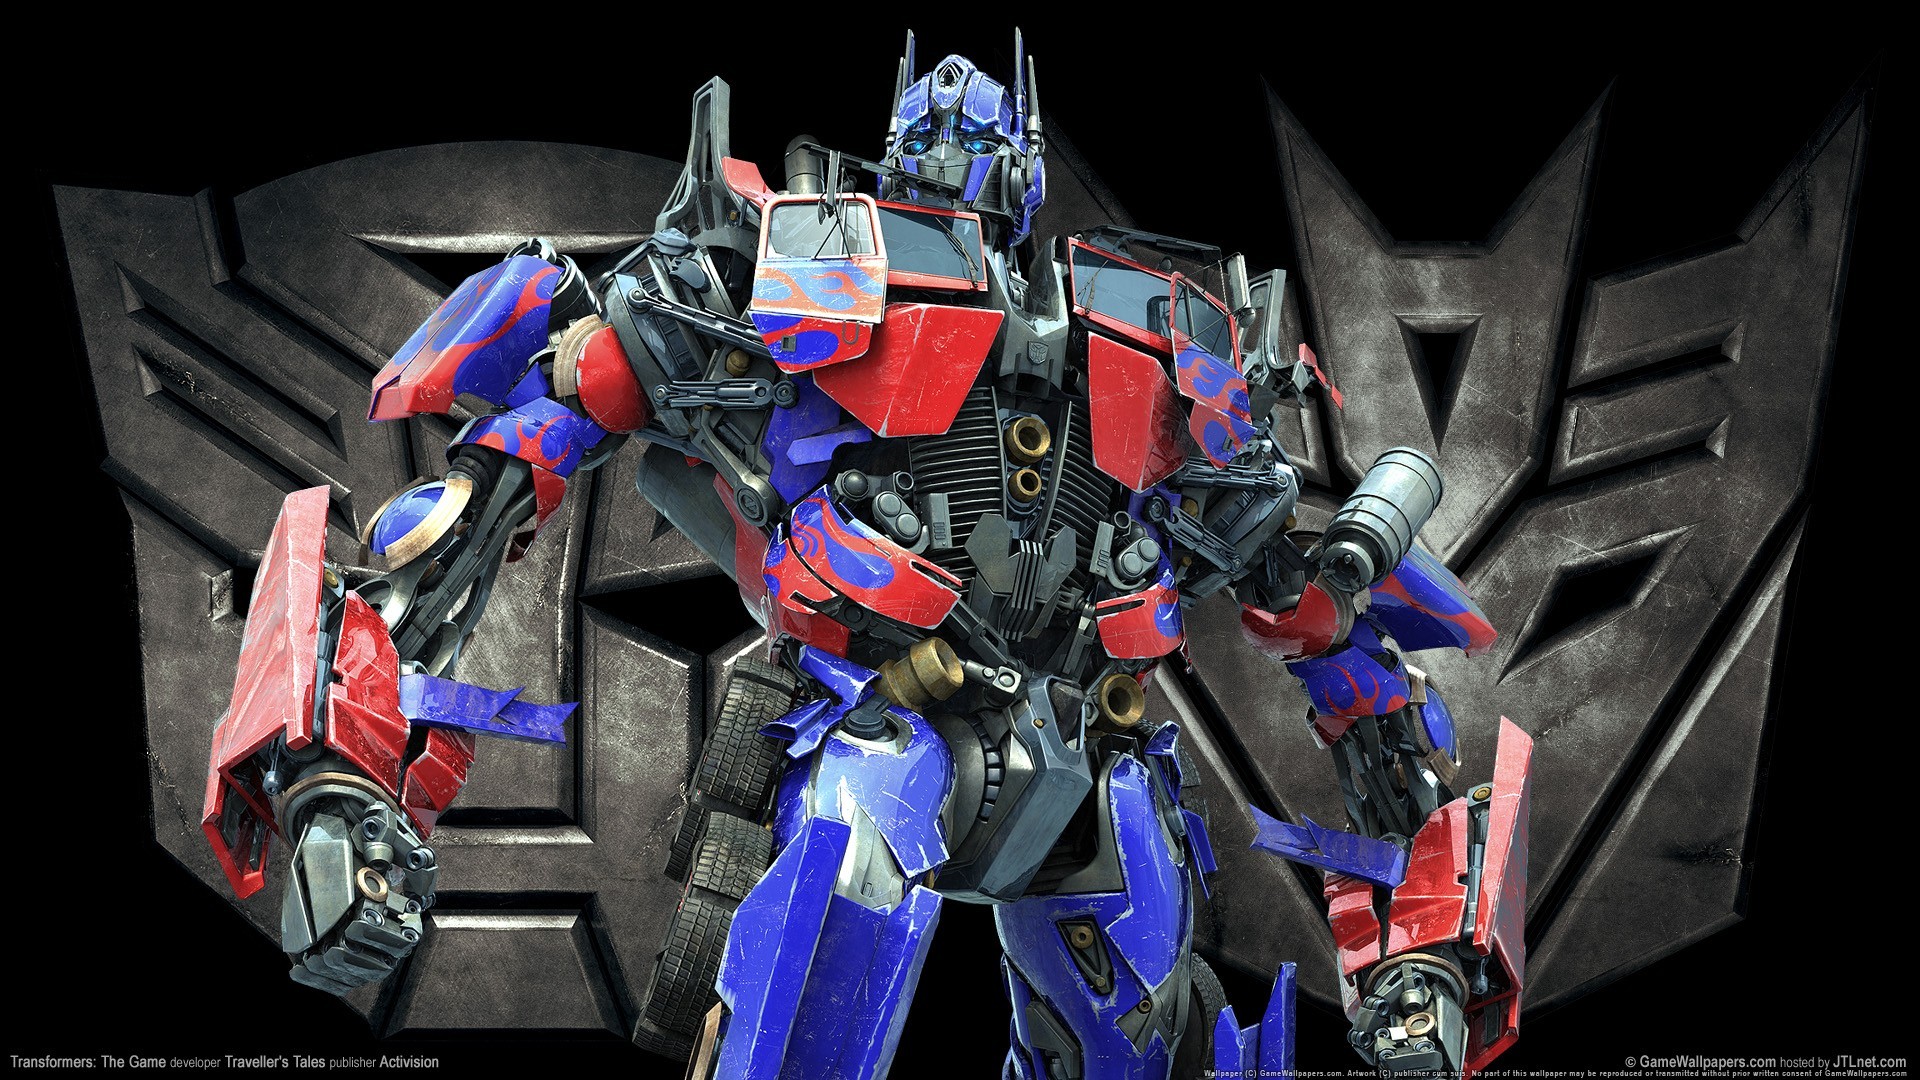 General 1920x1080 Transformers Optimus Prime Transformers: The Game video games robot Hasbro video game characters